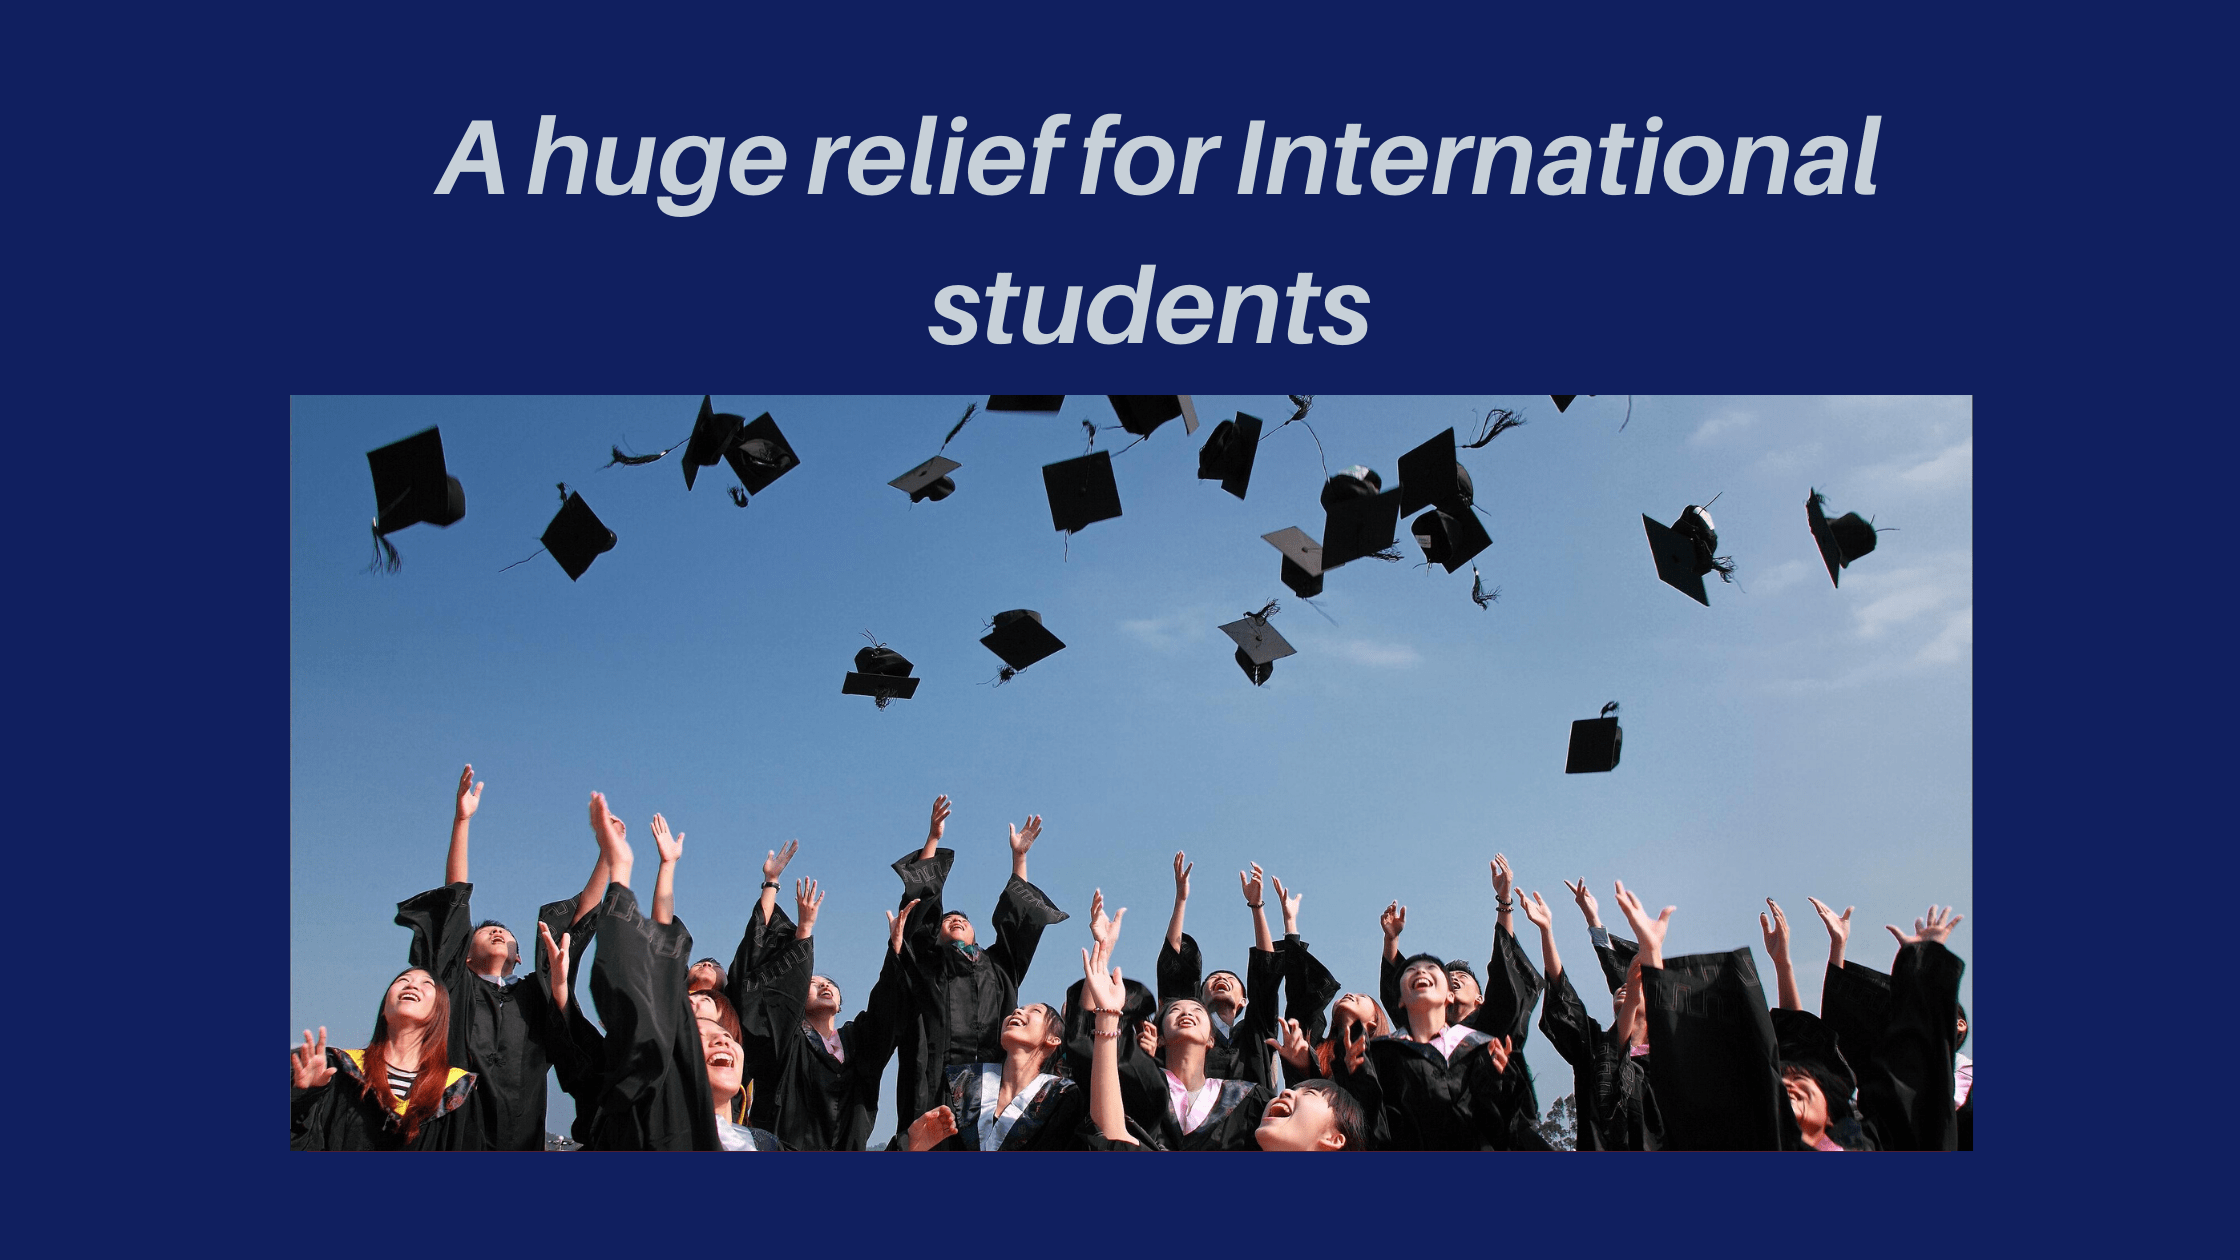 A huge relief for International students